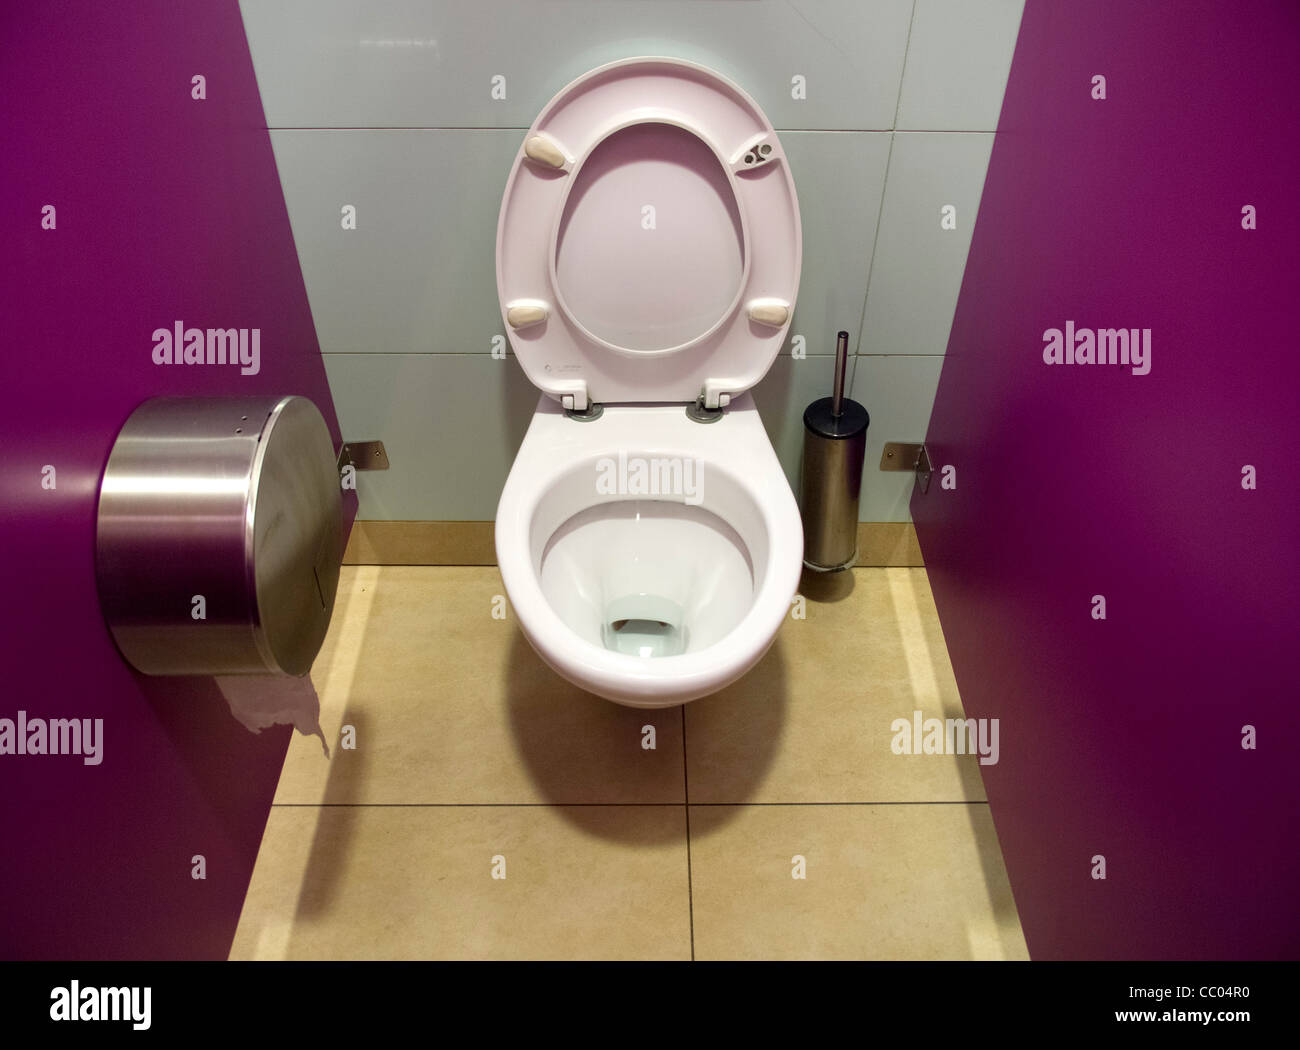 Toilet in a public restroom viewed from above Stock Photo